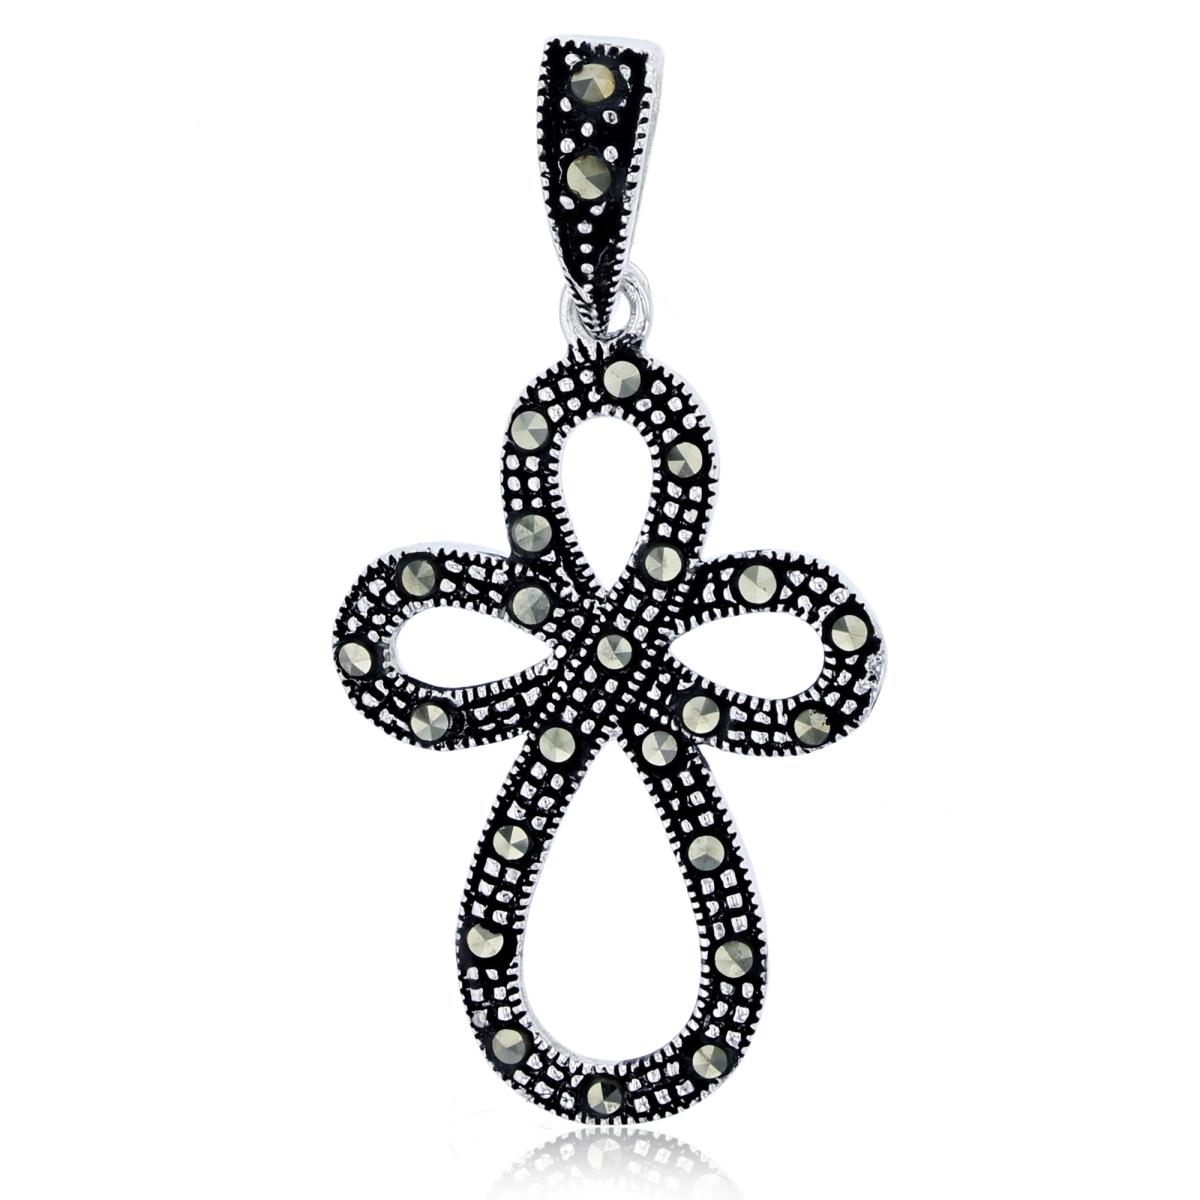 Sterling Silver Oxidized 32x16mm Micropave Round Cut Marcasite Rounded Open Cross Pendant